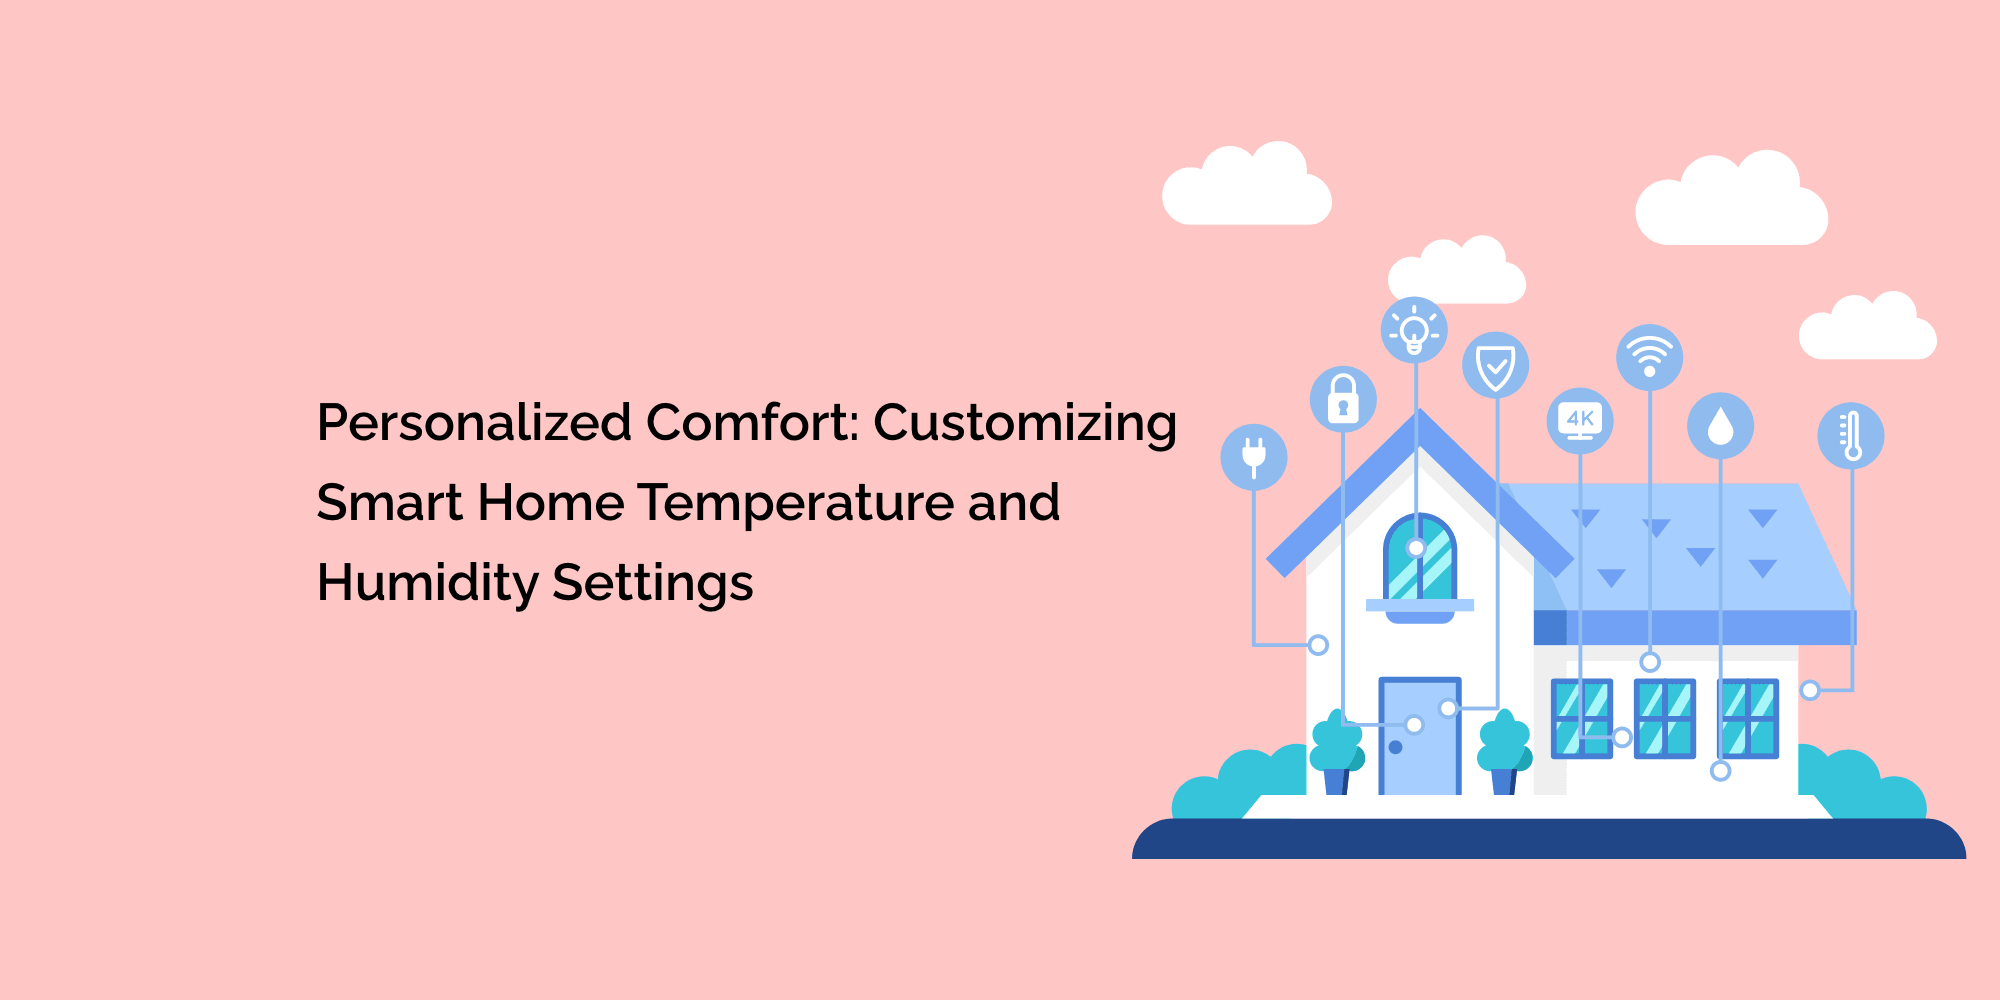 Personalized Comfort: Customizing Smart Home Temperature and Humidity Settings